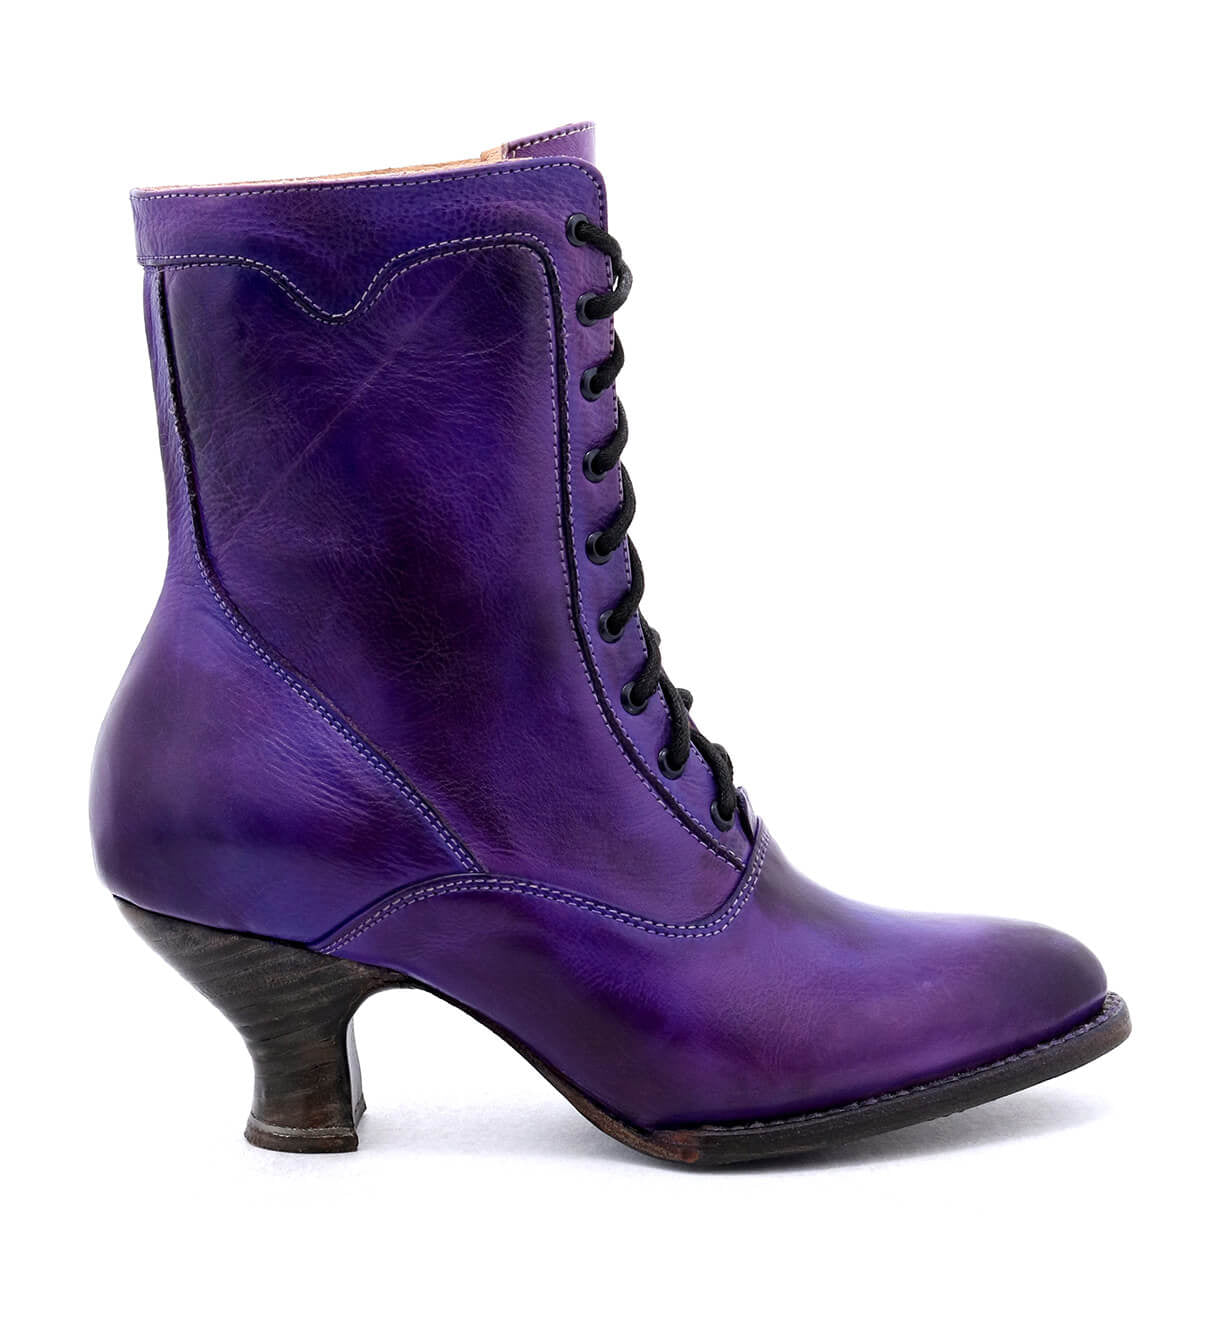 A Victorian style women's purple leather ankle boot, crafted with uncompromising quality and hand-dyed, called the Eleanor by Oak Tree Farms.